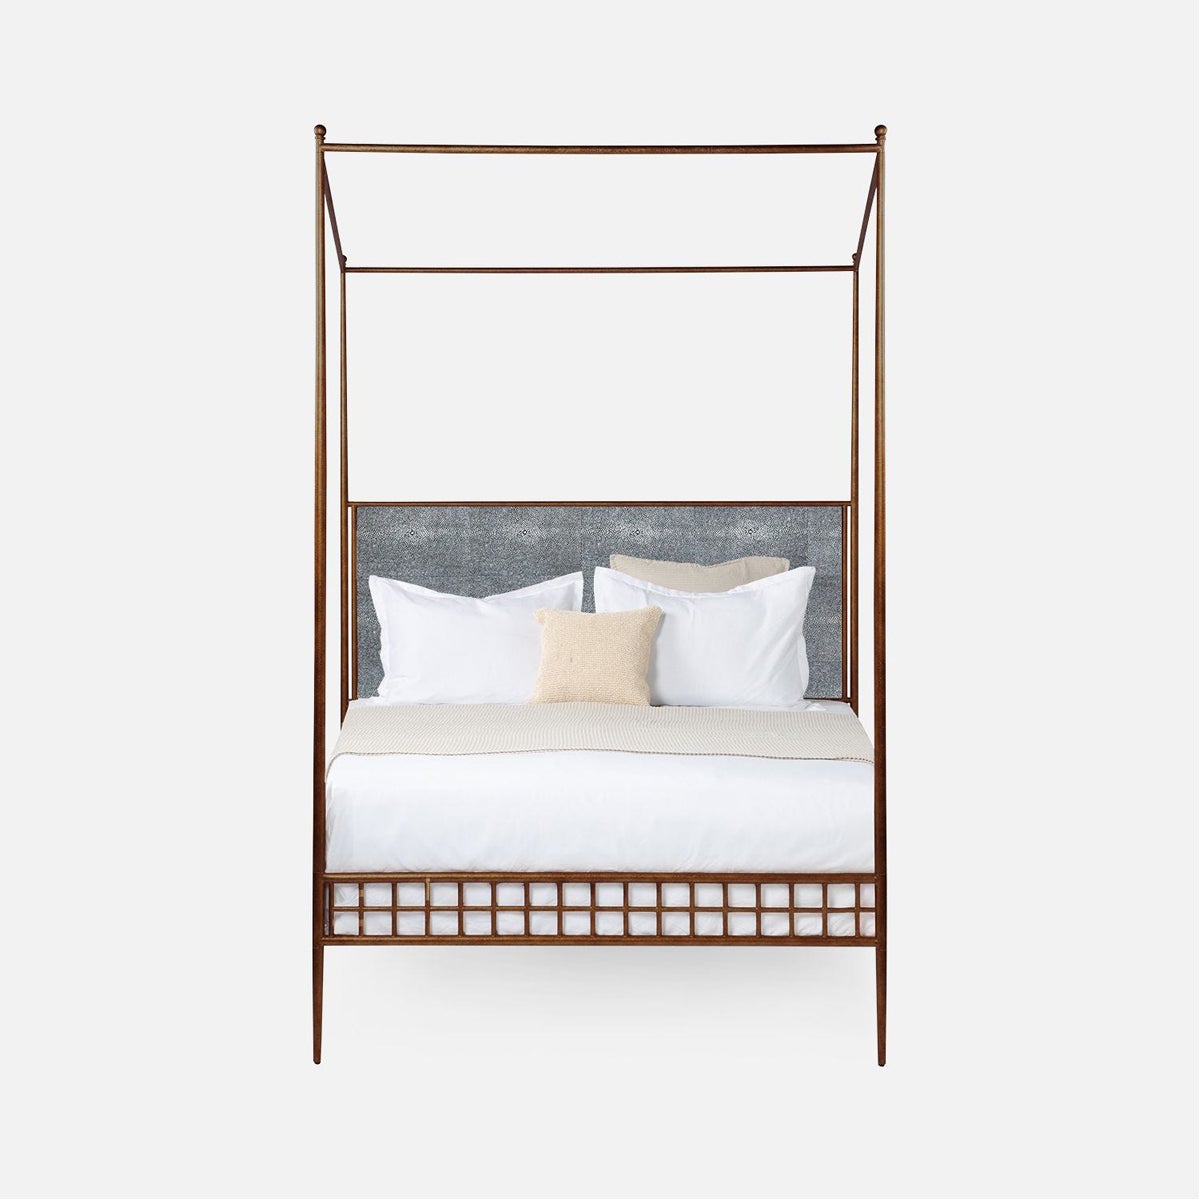 Made Goods Hamilton Textured Iron Canopy Bed in Arno Fabric